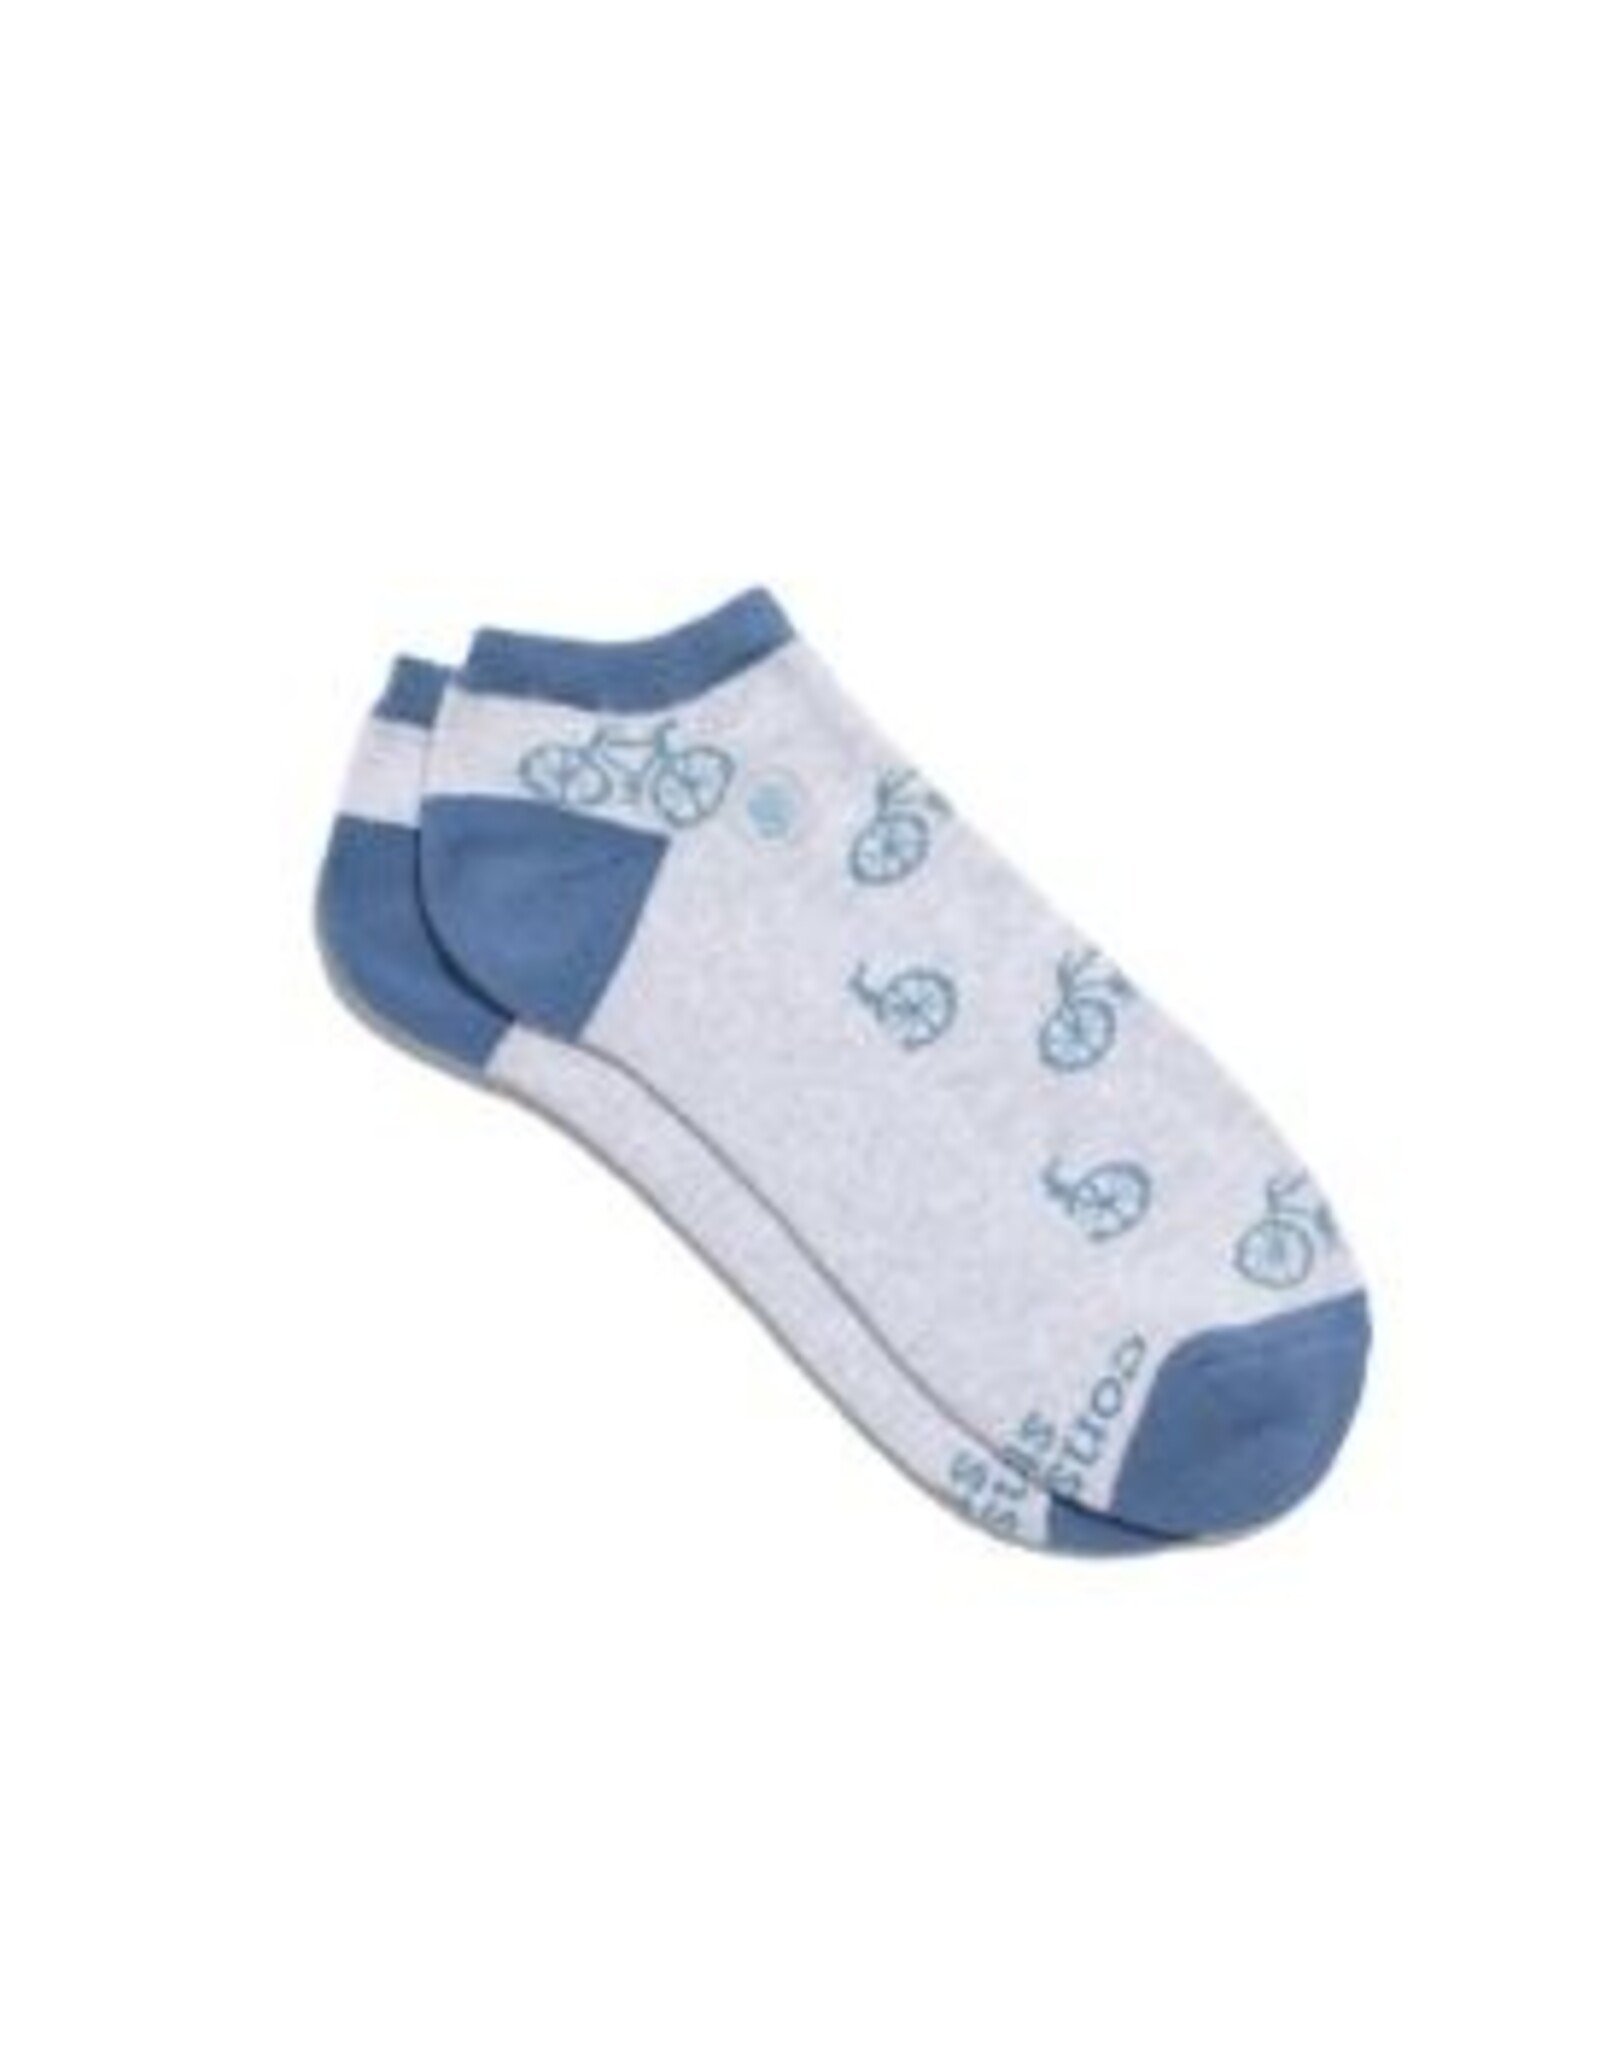 India Ankle Socks That Give Books - Gray w/ Bicycles